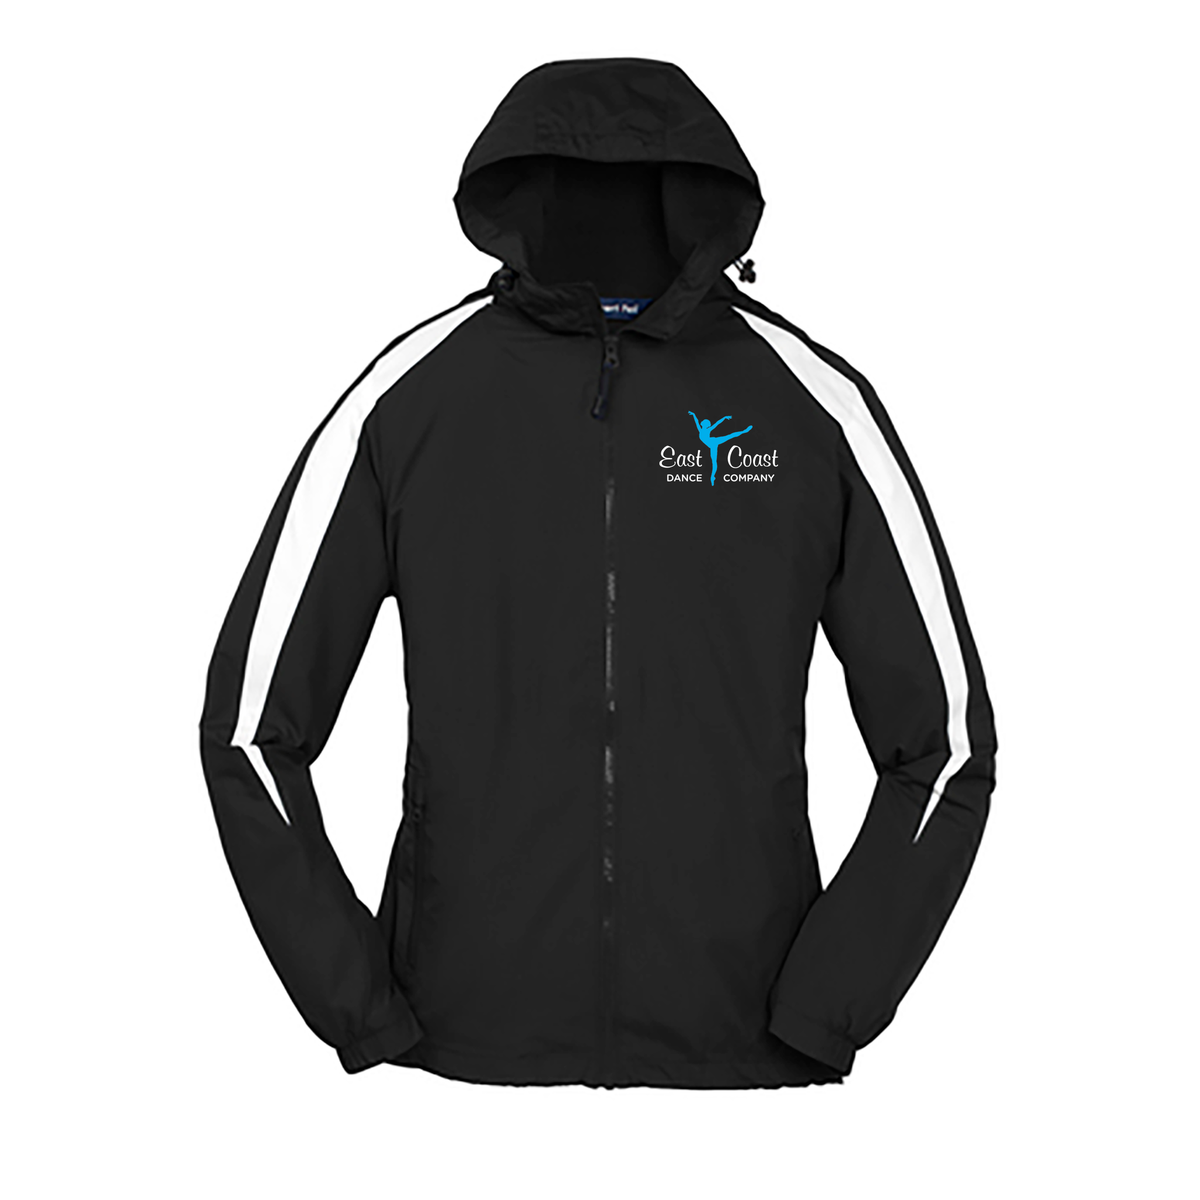 East Coast Dance Company Fleece-Lined Colorblock Jacket - YOUTH SIZES AVAILABLE / PERSONALIZATION OPTION